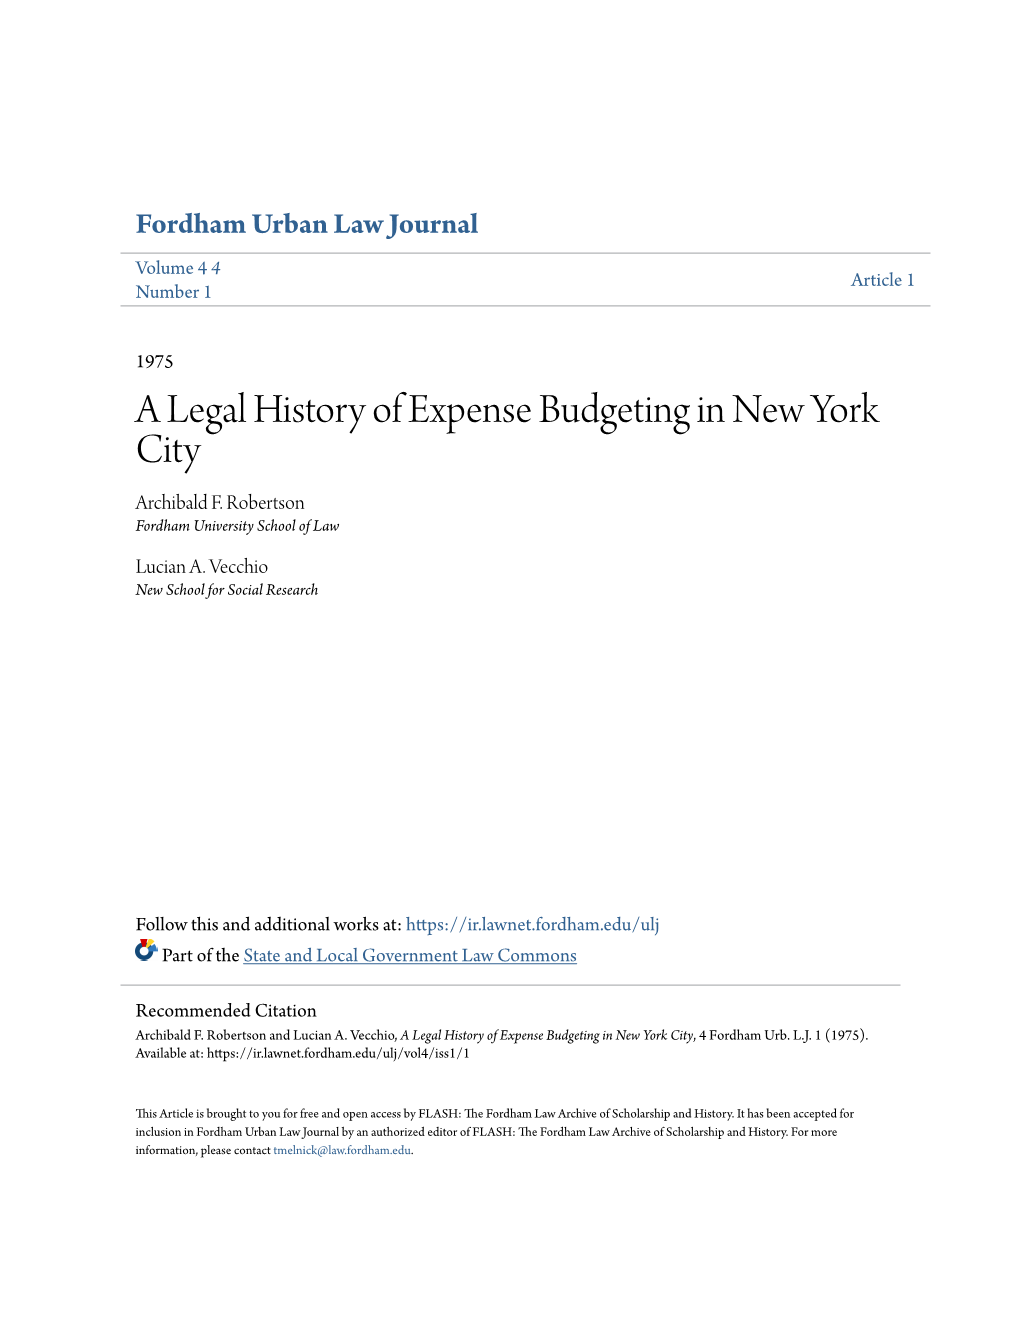 A Legal History of Expense Budgeting in New York City Archibald F